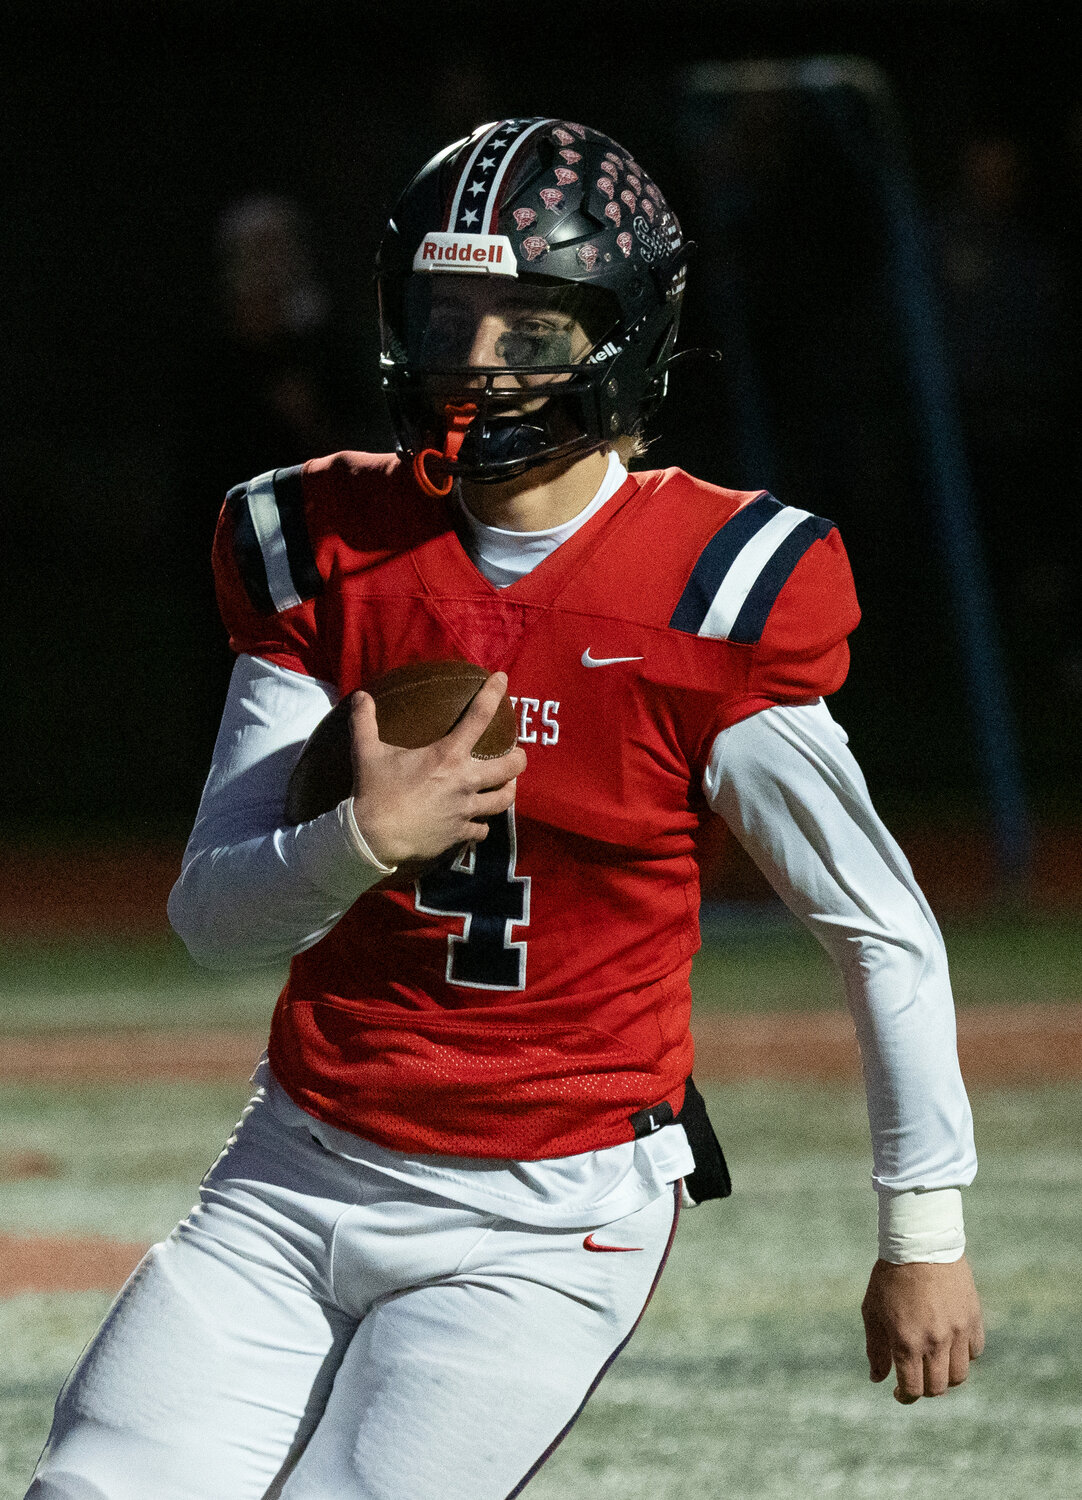 Senior quarterback Owen West had three touchdown passes to lead South Side to a 35-0 semifinal playoff win over Plainedge.